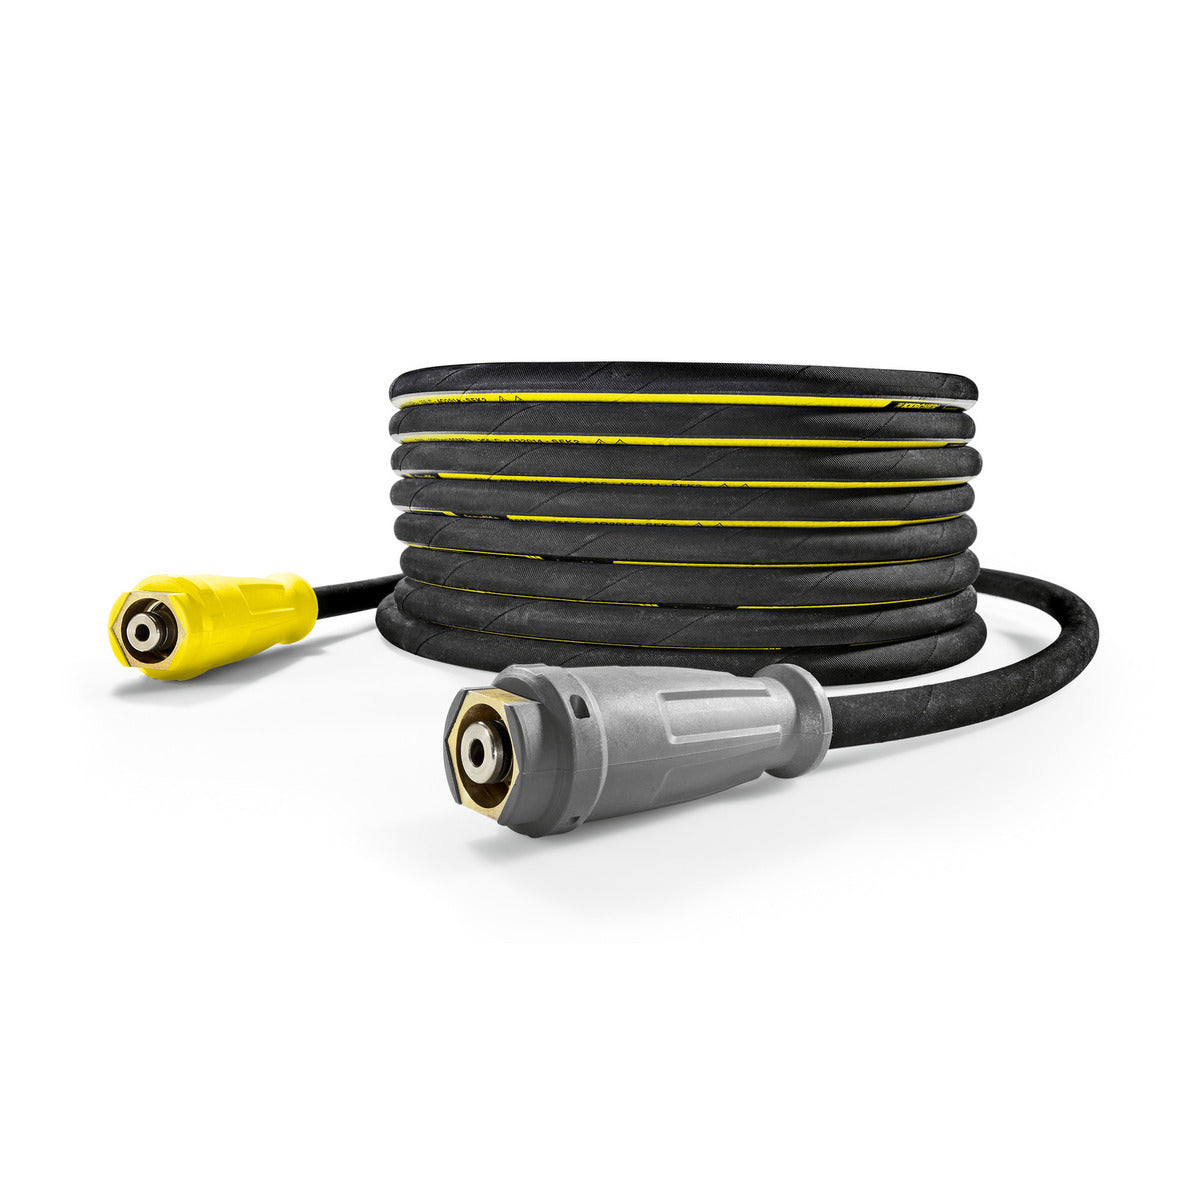 Karcher High-pressure Hose, 15 m, DN 8, 315 bar, 2 x EASY!Lock 6.110-030.0 - Active Water Solutions